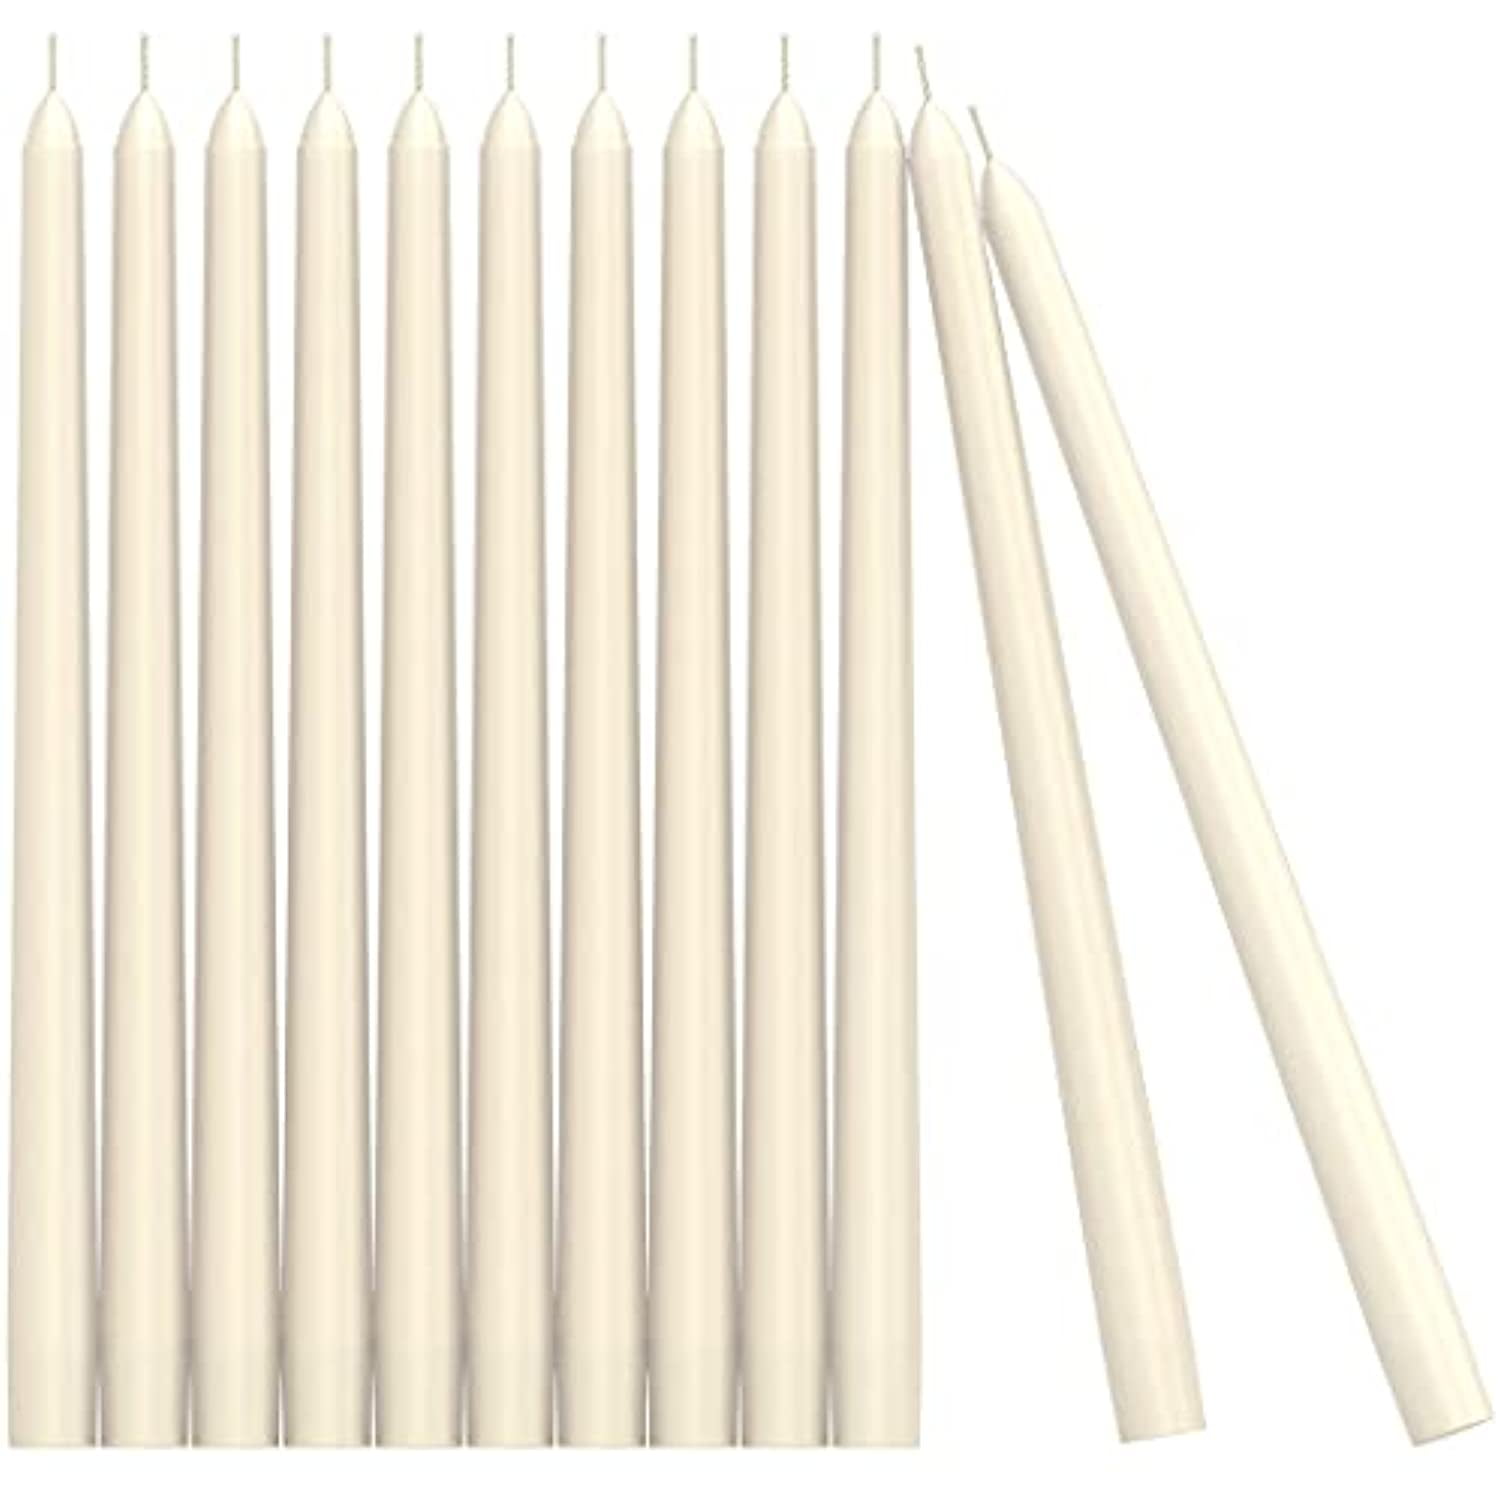 CANDWAX 10 inch Taper Candle Sticks Long Burning Set of 12 - Dripless  Dinner Candles for Table Look Like Matte Metallic Candles and are Ideal for  Any Occasion - Ivory Glitter Taper Candles - Walmart.com